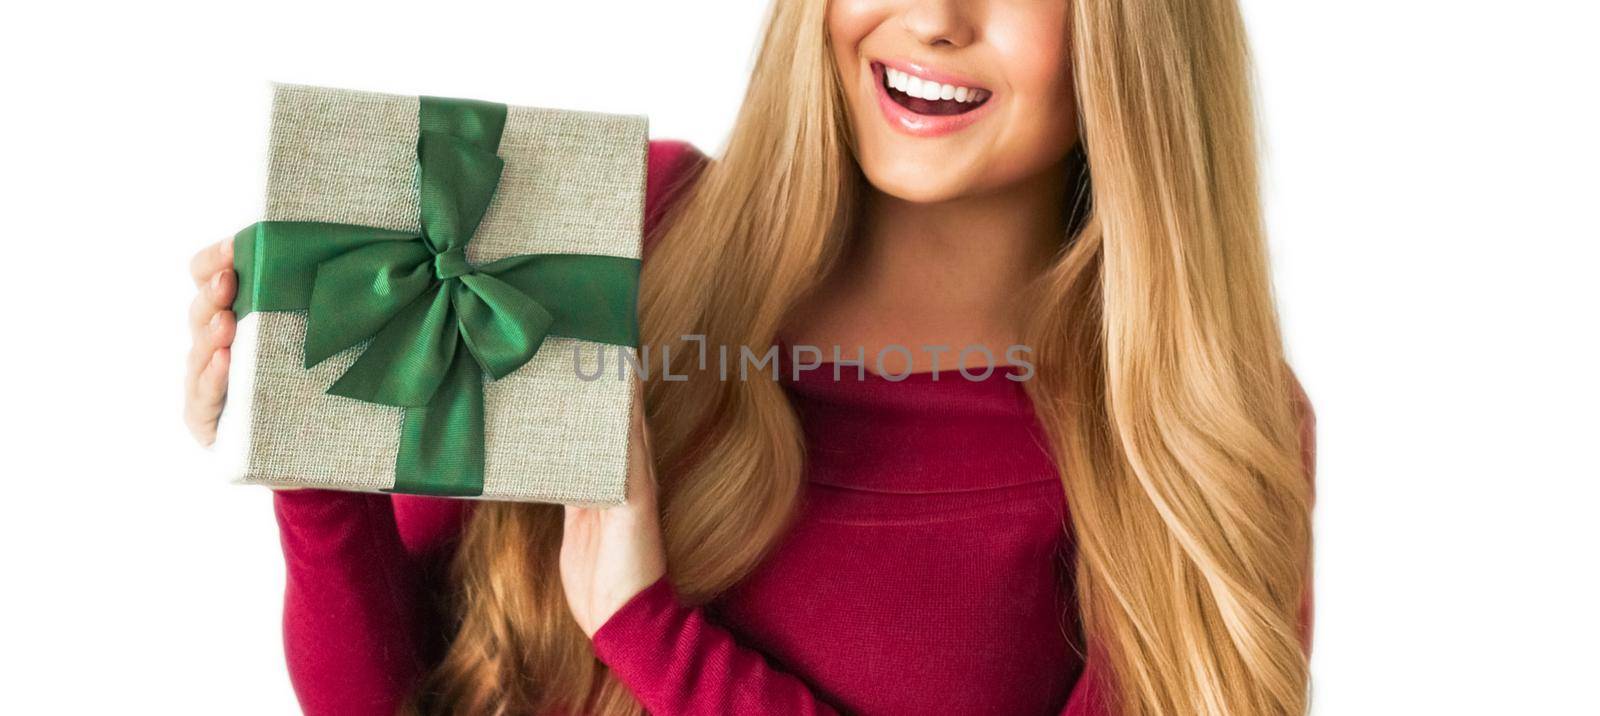 Birthday, Christmas or holiday present, happy woman holding a green gift or luxury beauty box subscription delivery isolated on white background, portrait